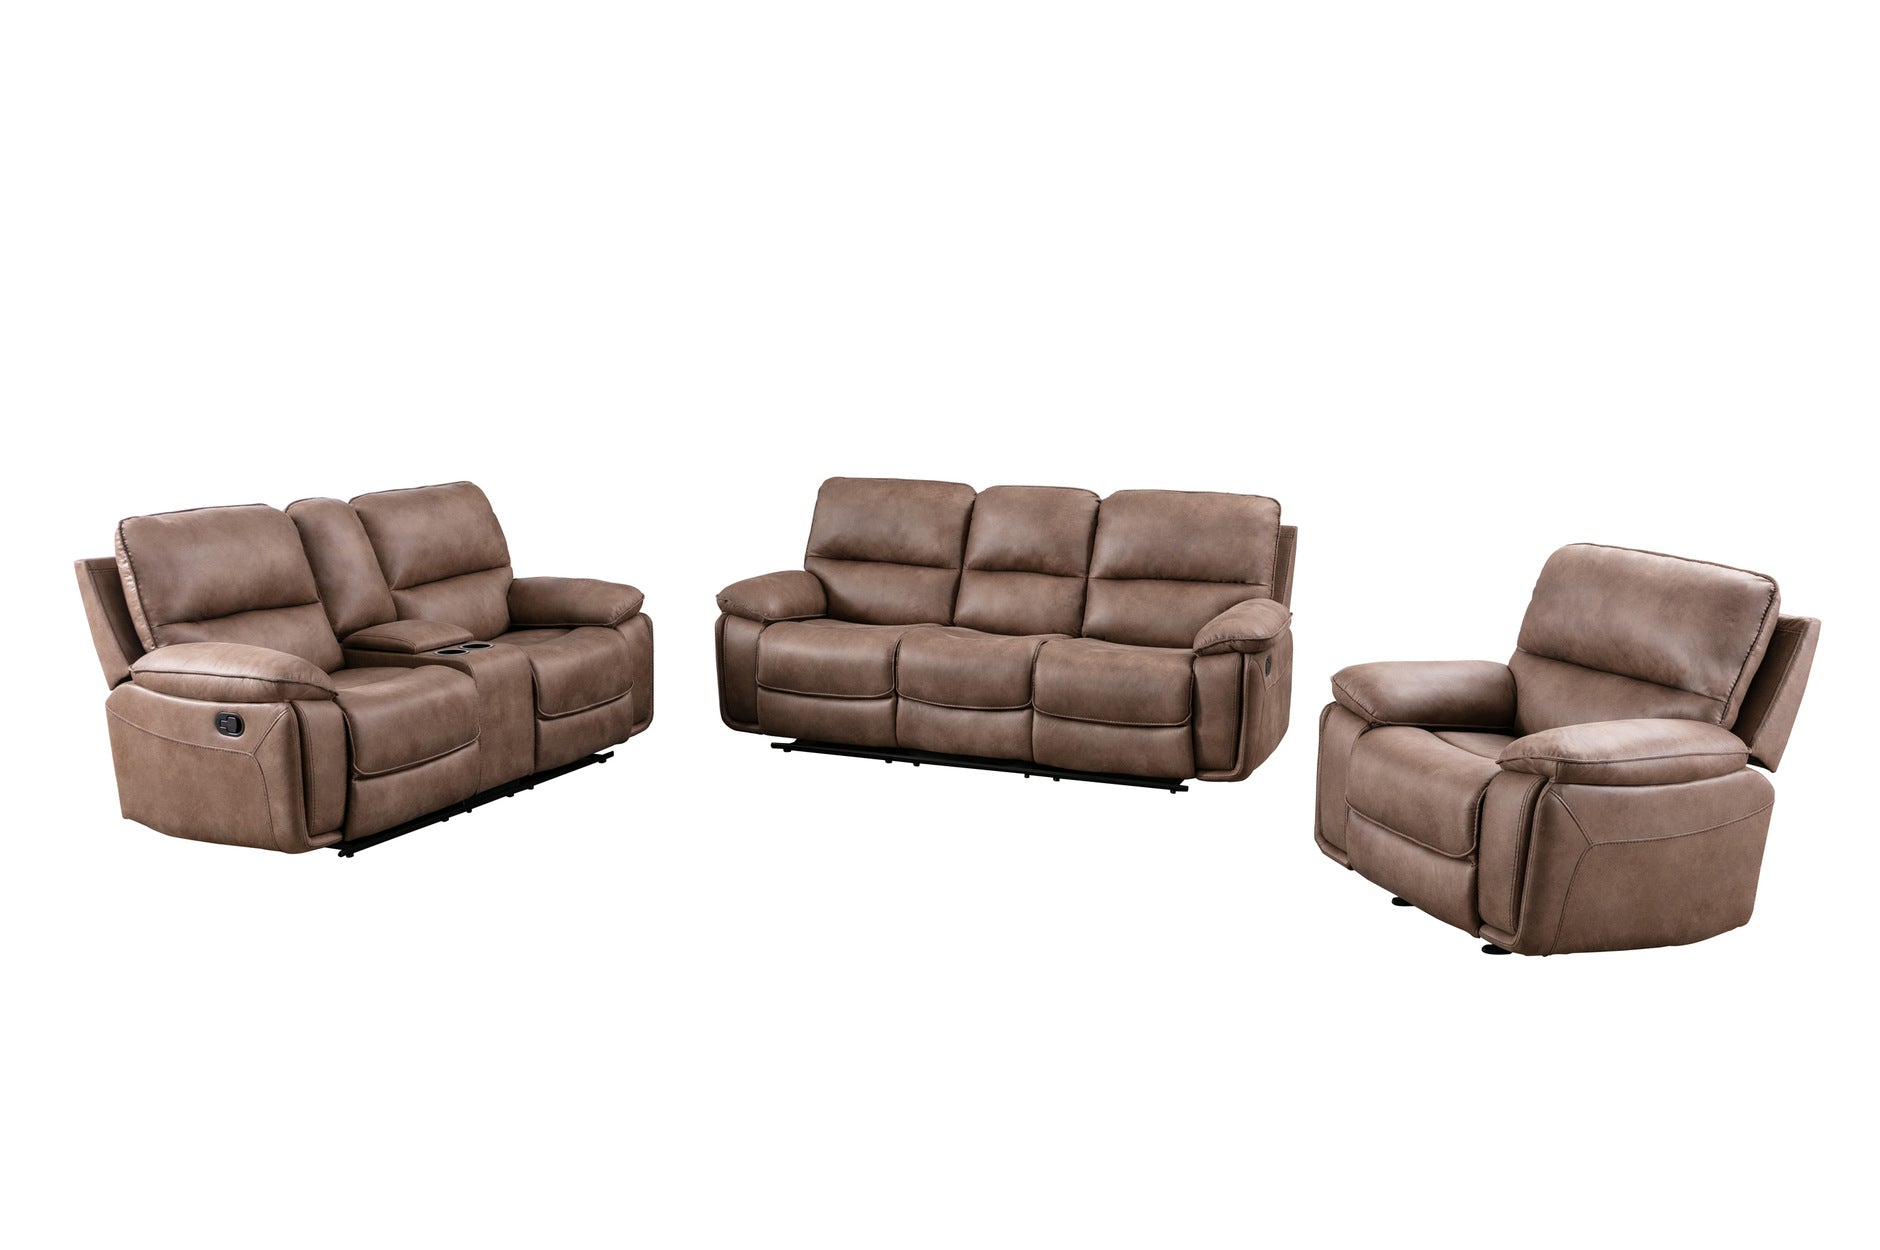 Brown Easton Recliner Seating Collection 99929BRW